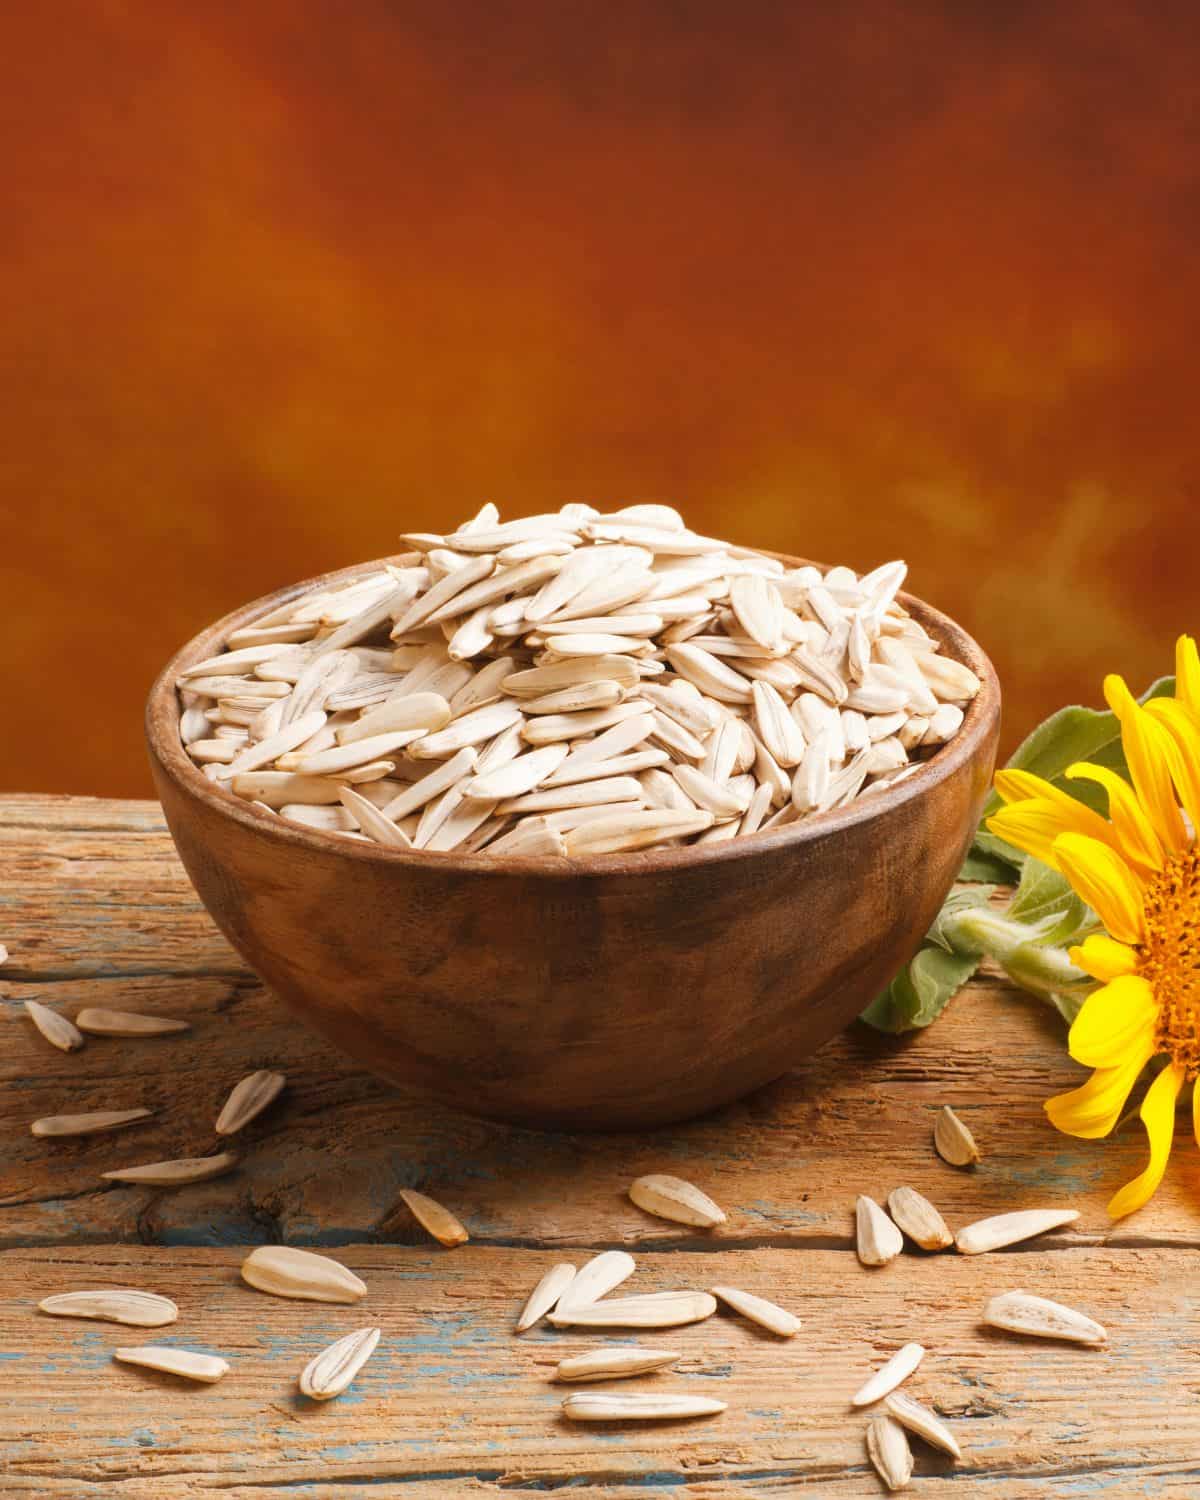 Sunflower seeds in a wooden bowl with a sunflower on a table.